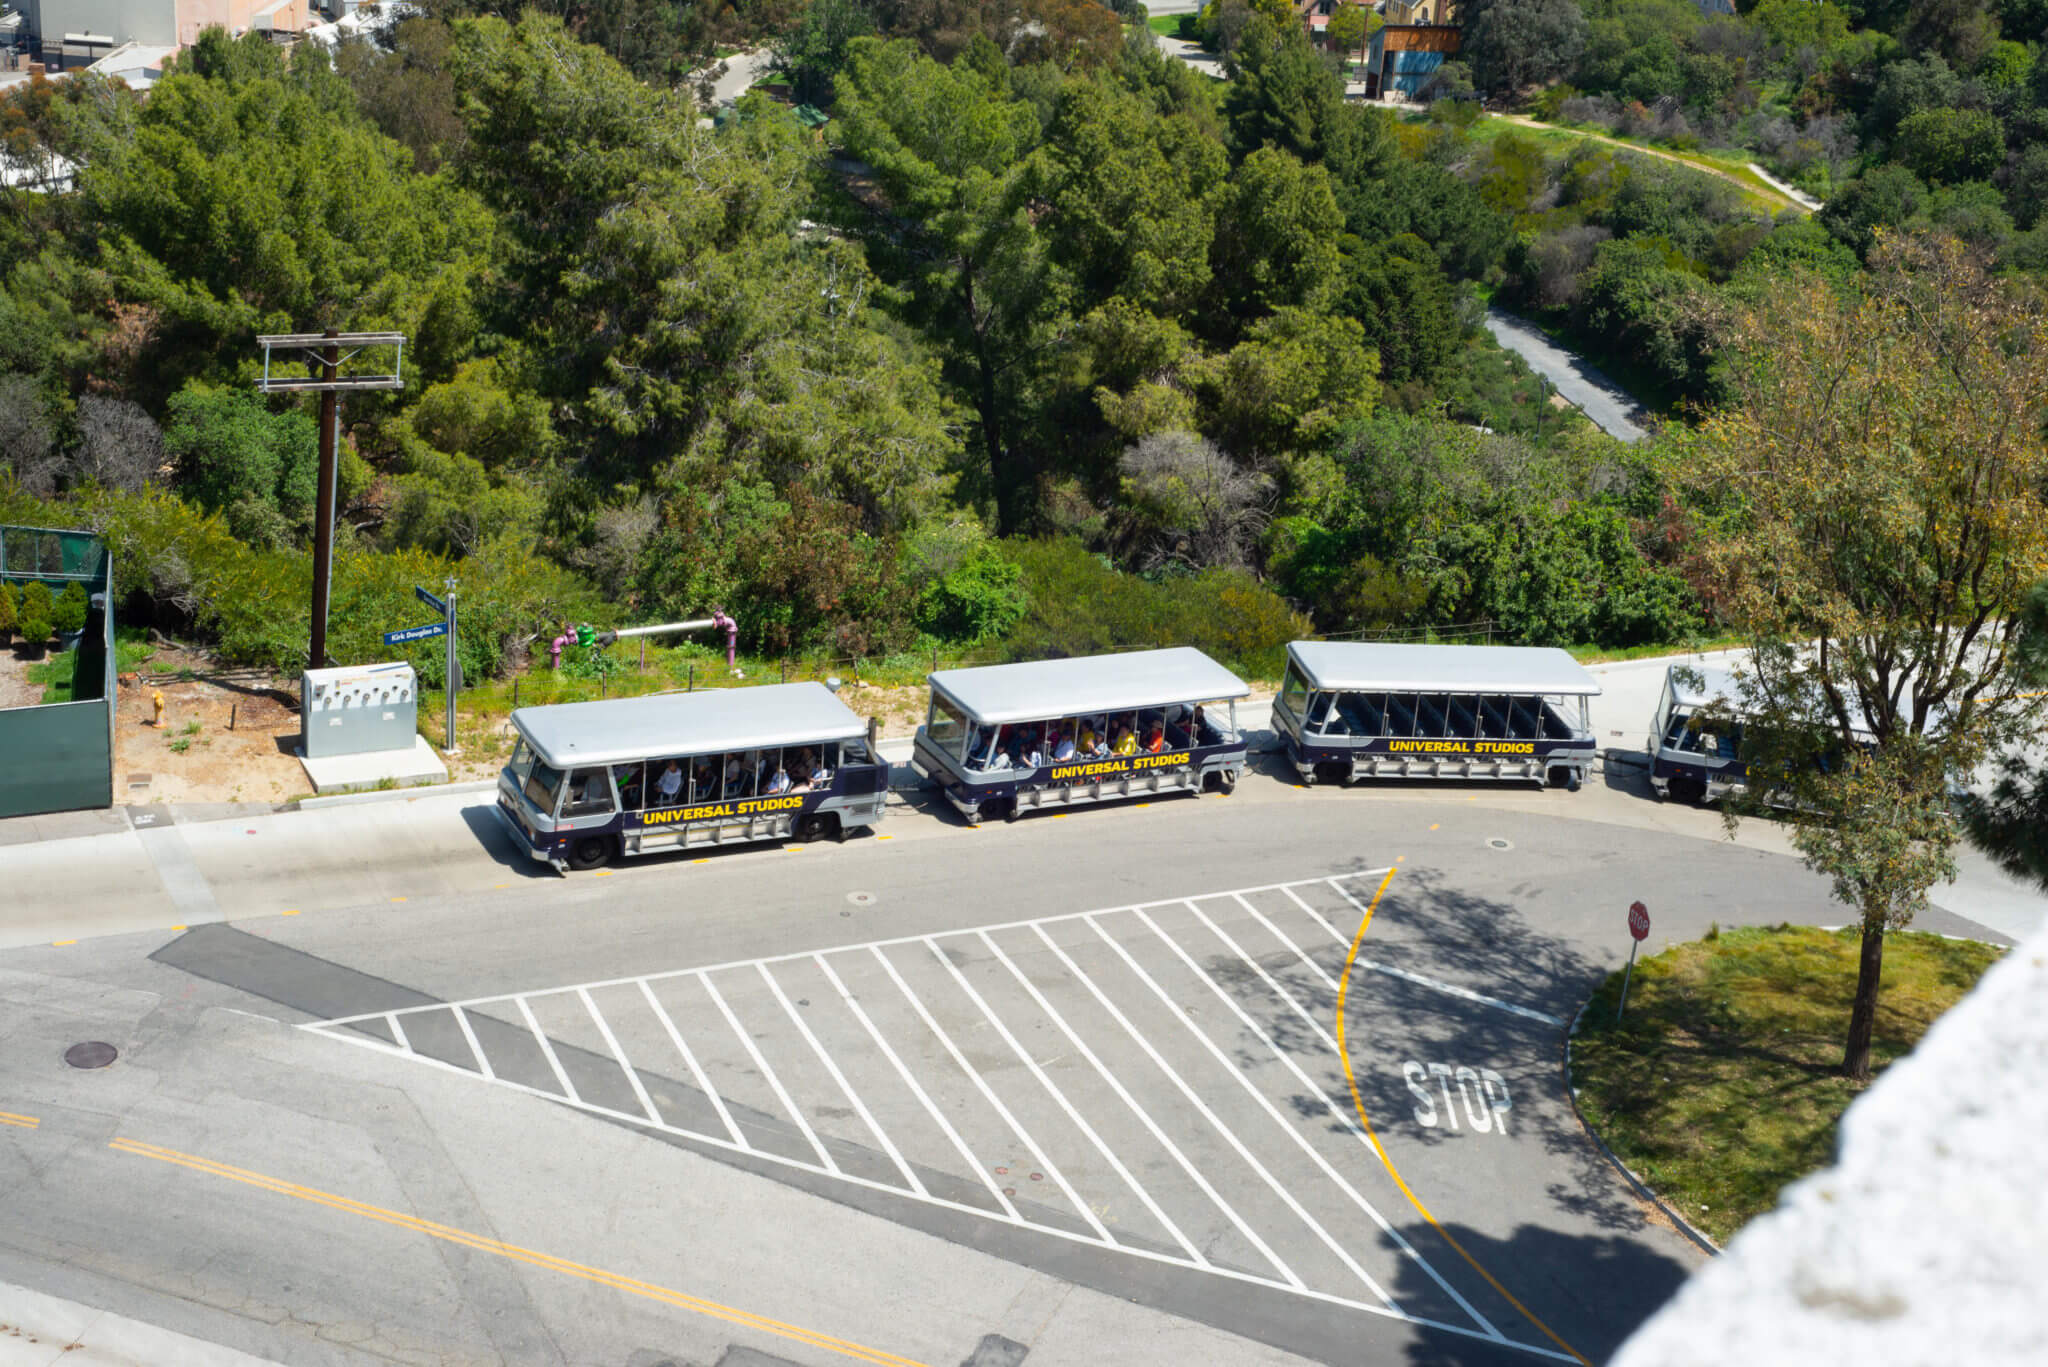 The world-famous Tram Tour in Universal Studios Hollywood in the parking lot.